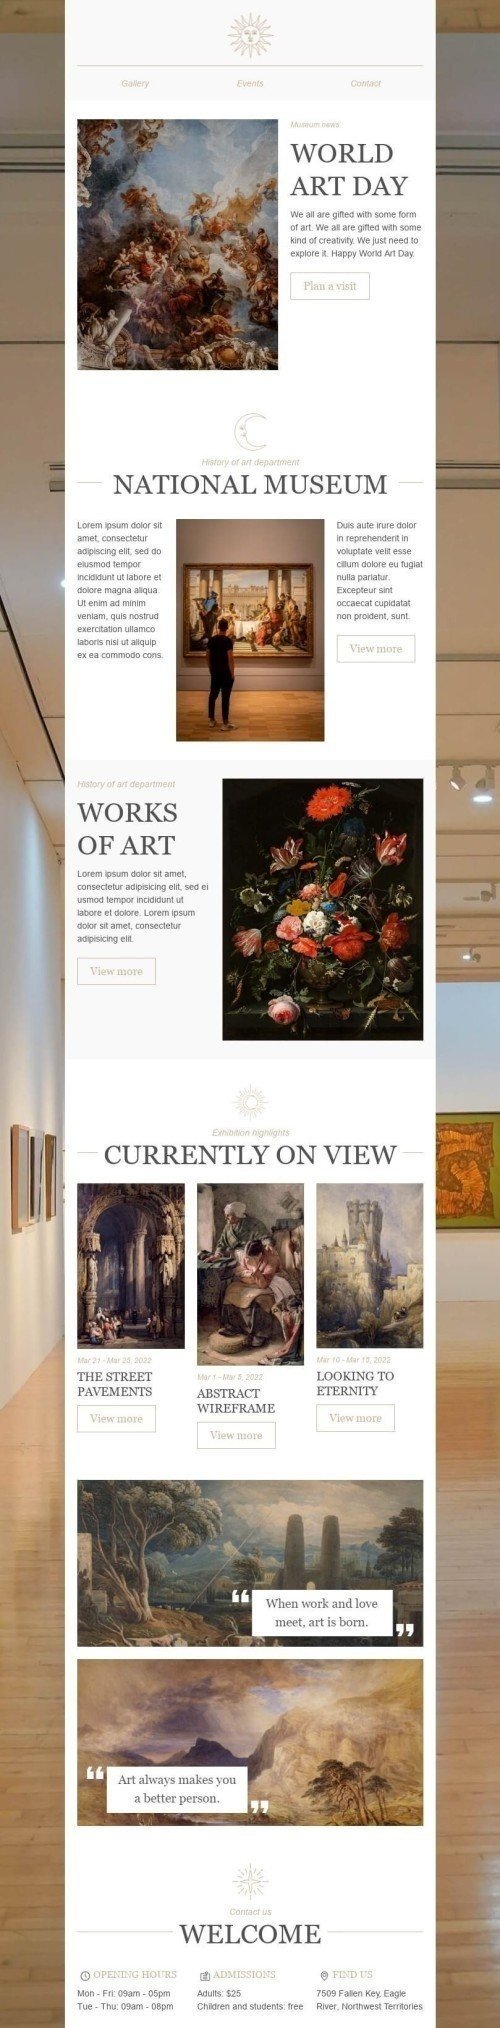 World Art Day Email Template "National Museum" for Art Gallery industry mobile view